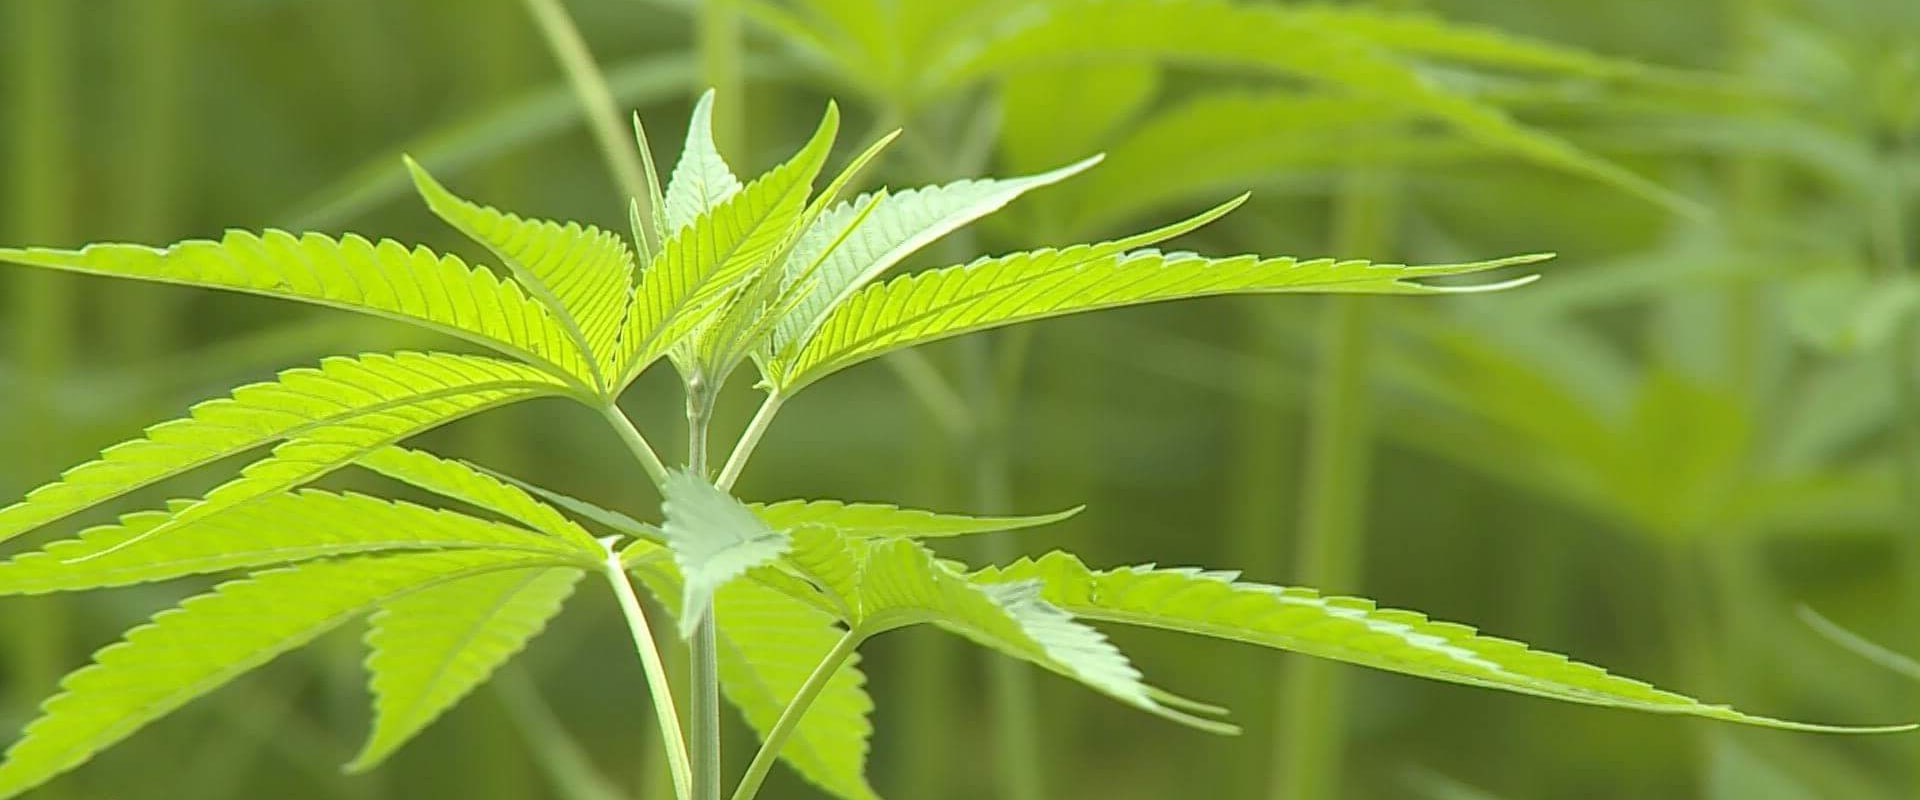 The Anatomy of the Hemp Plant: What Part is Used to Make Hemp?